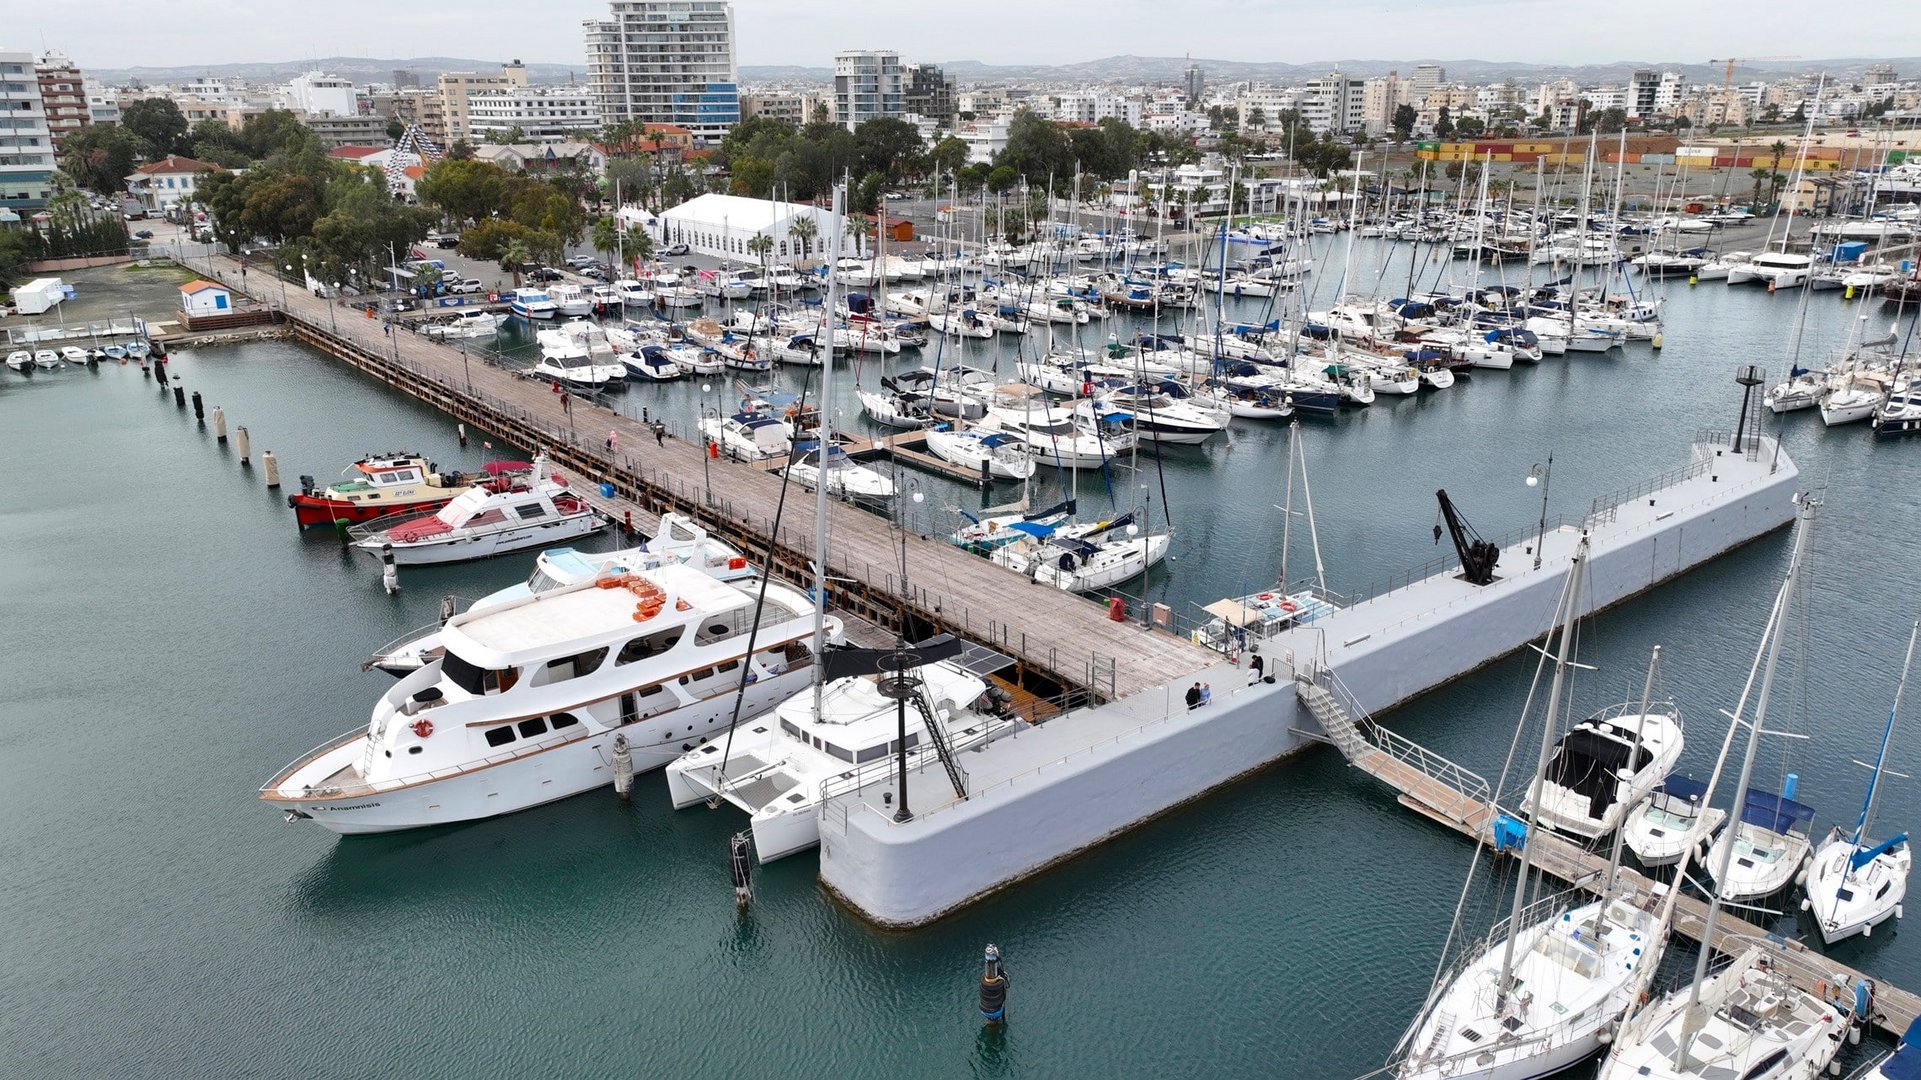 Jobs of Larnaca port and marina workers are safe